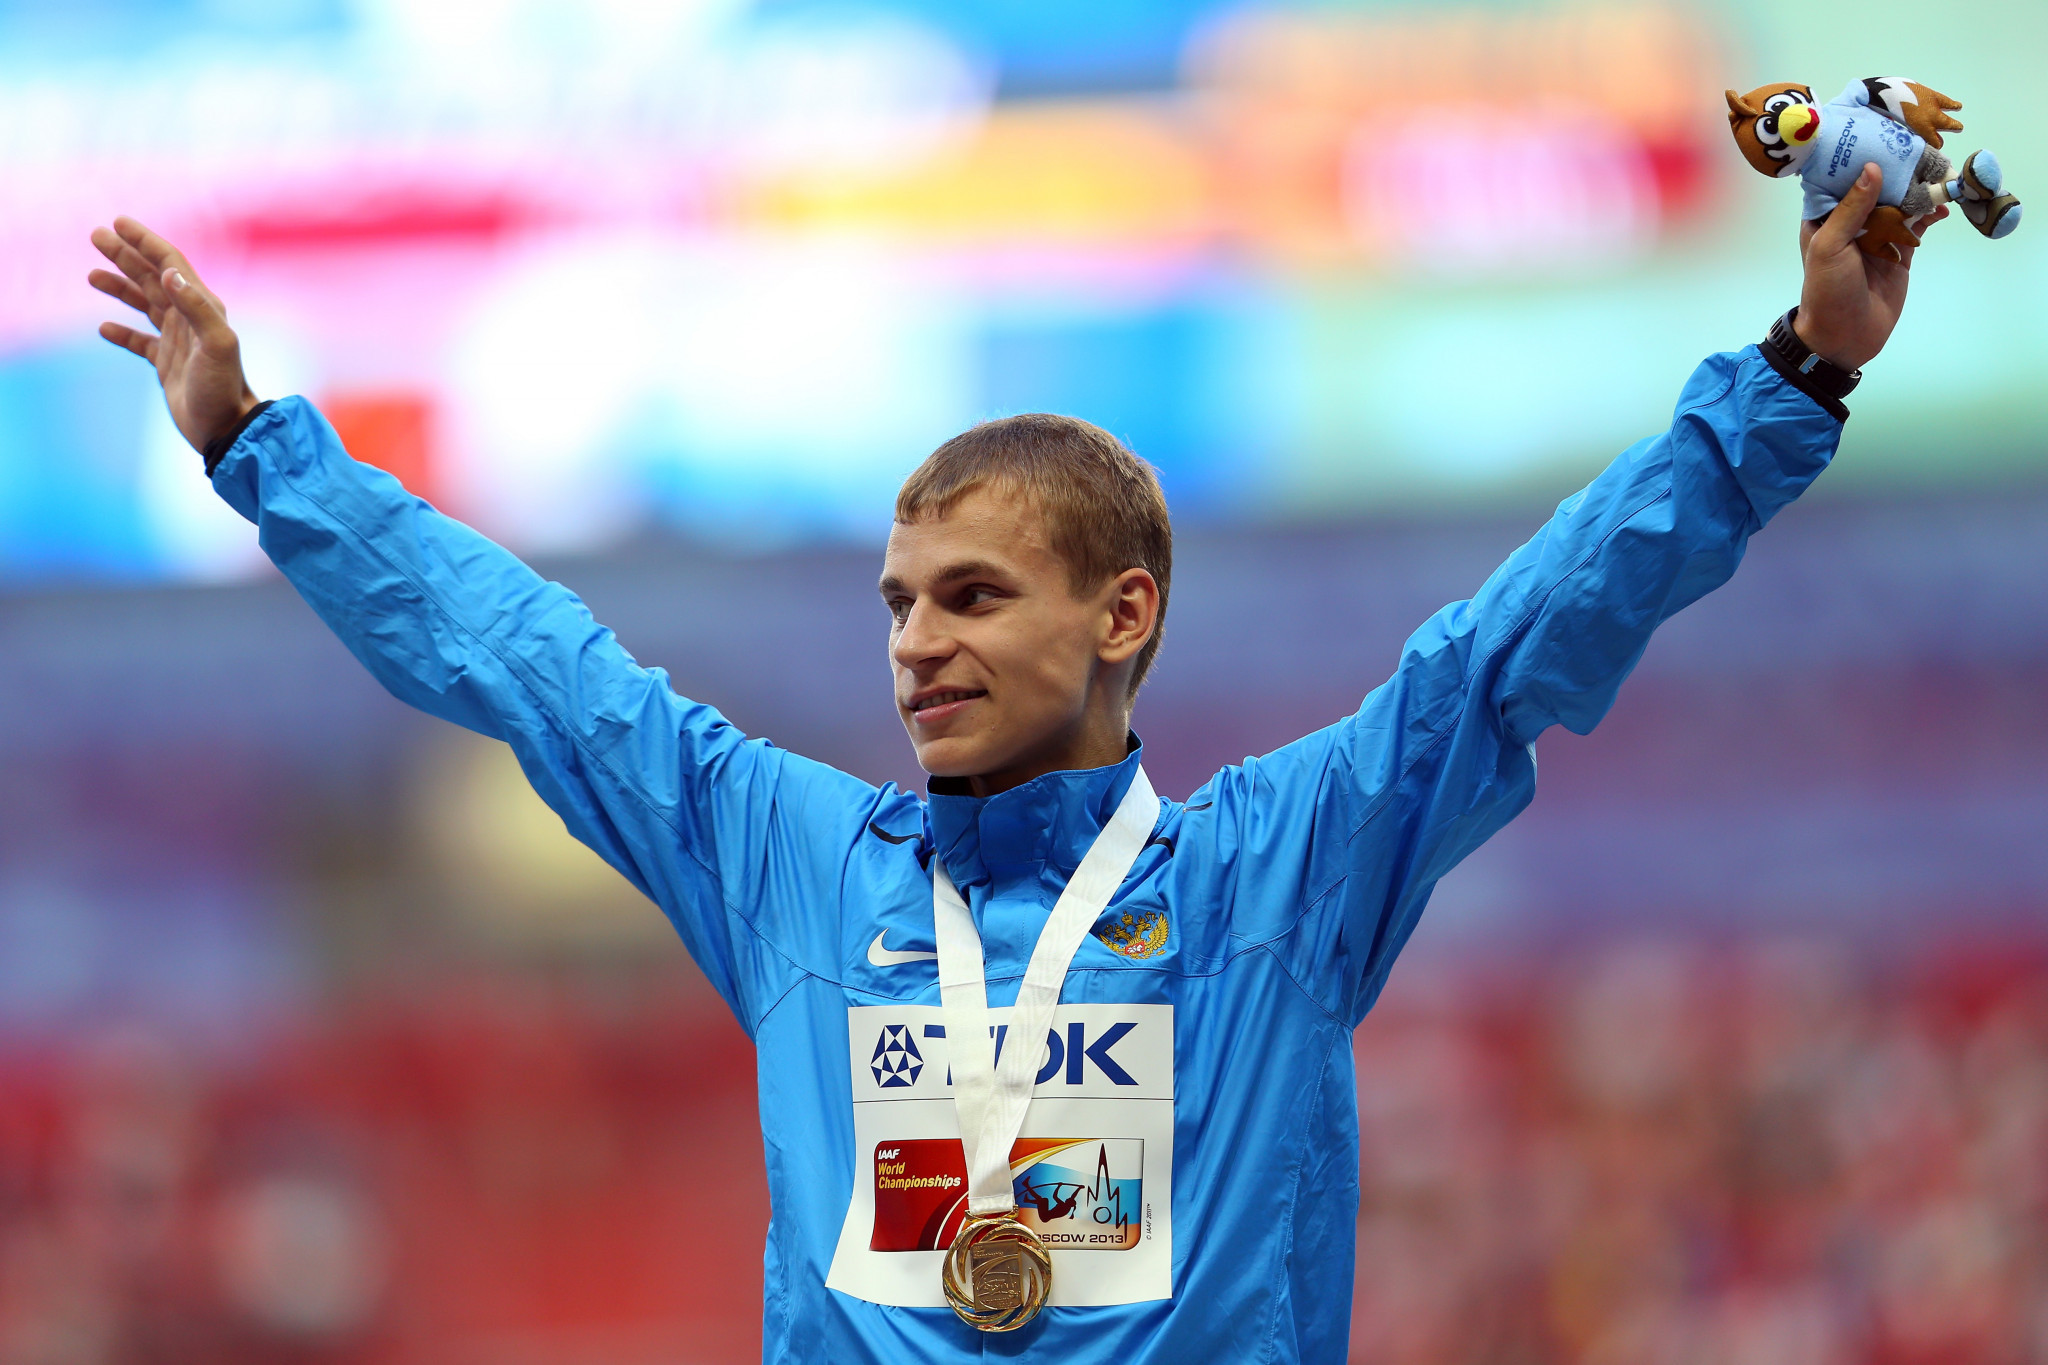 All of Aleksandr Ivanov's results from May 7 2012 have been disqualified ©Getty Images